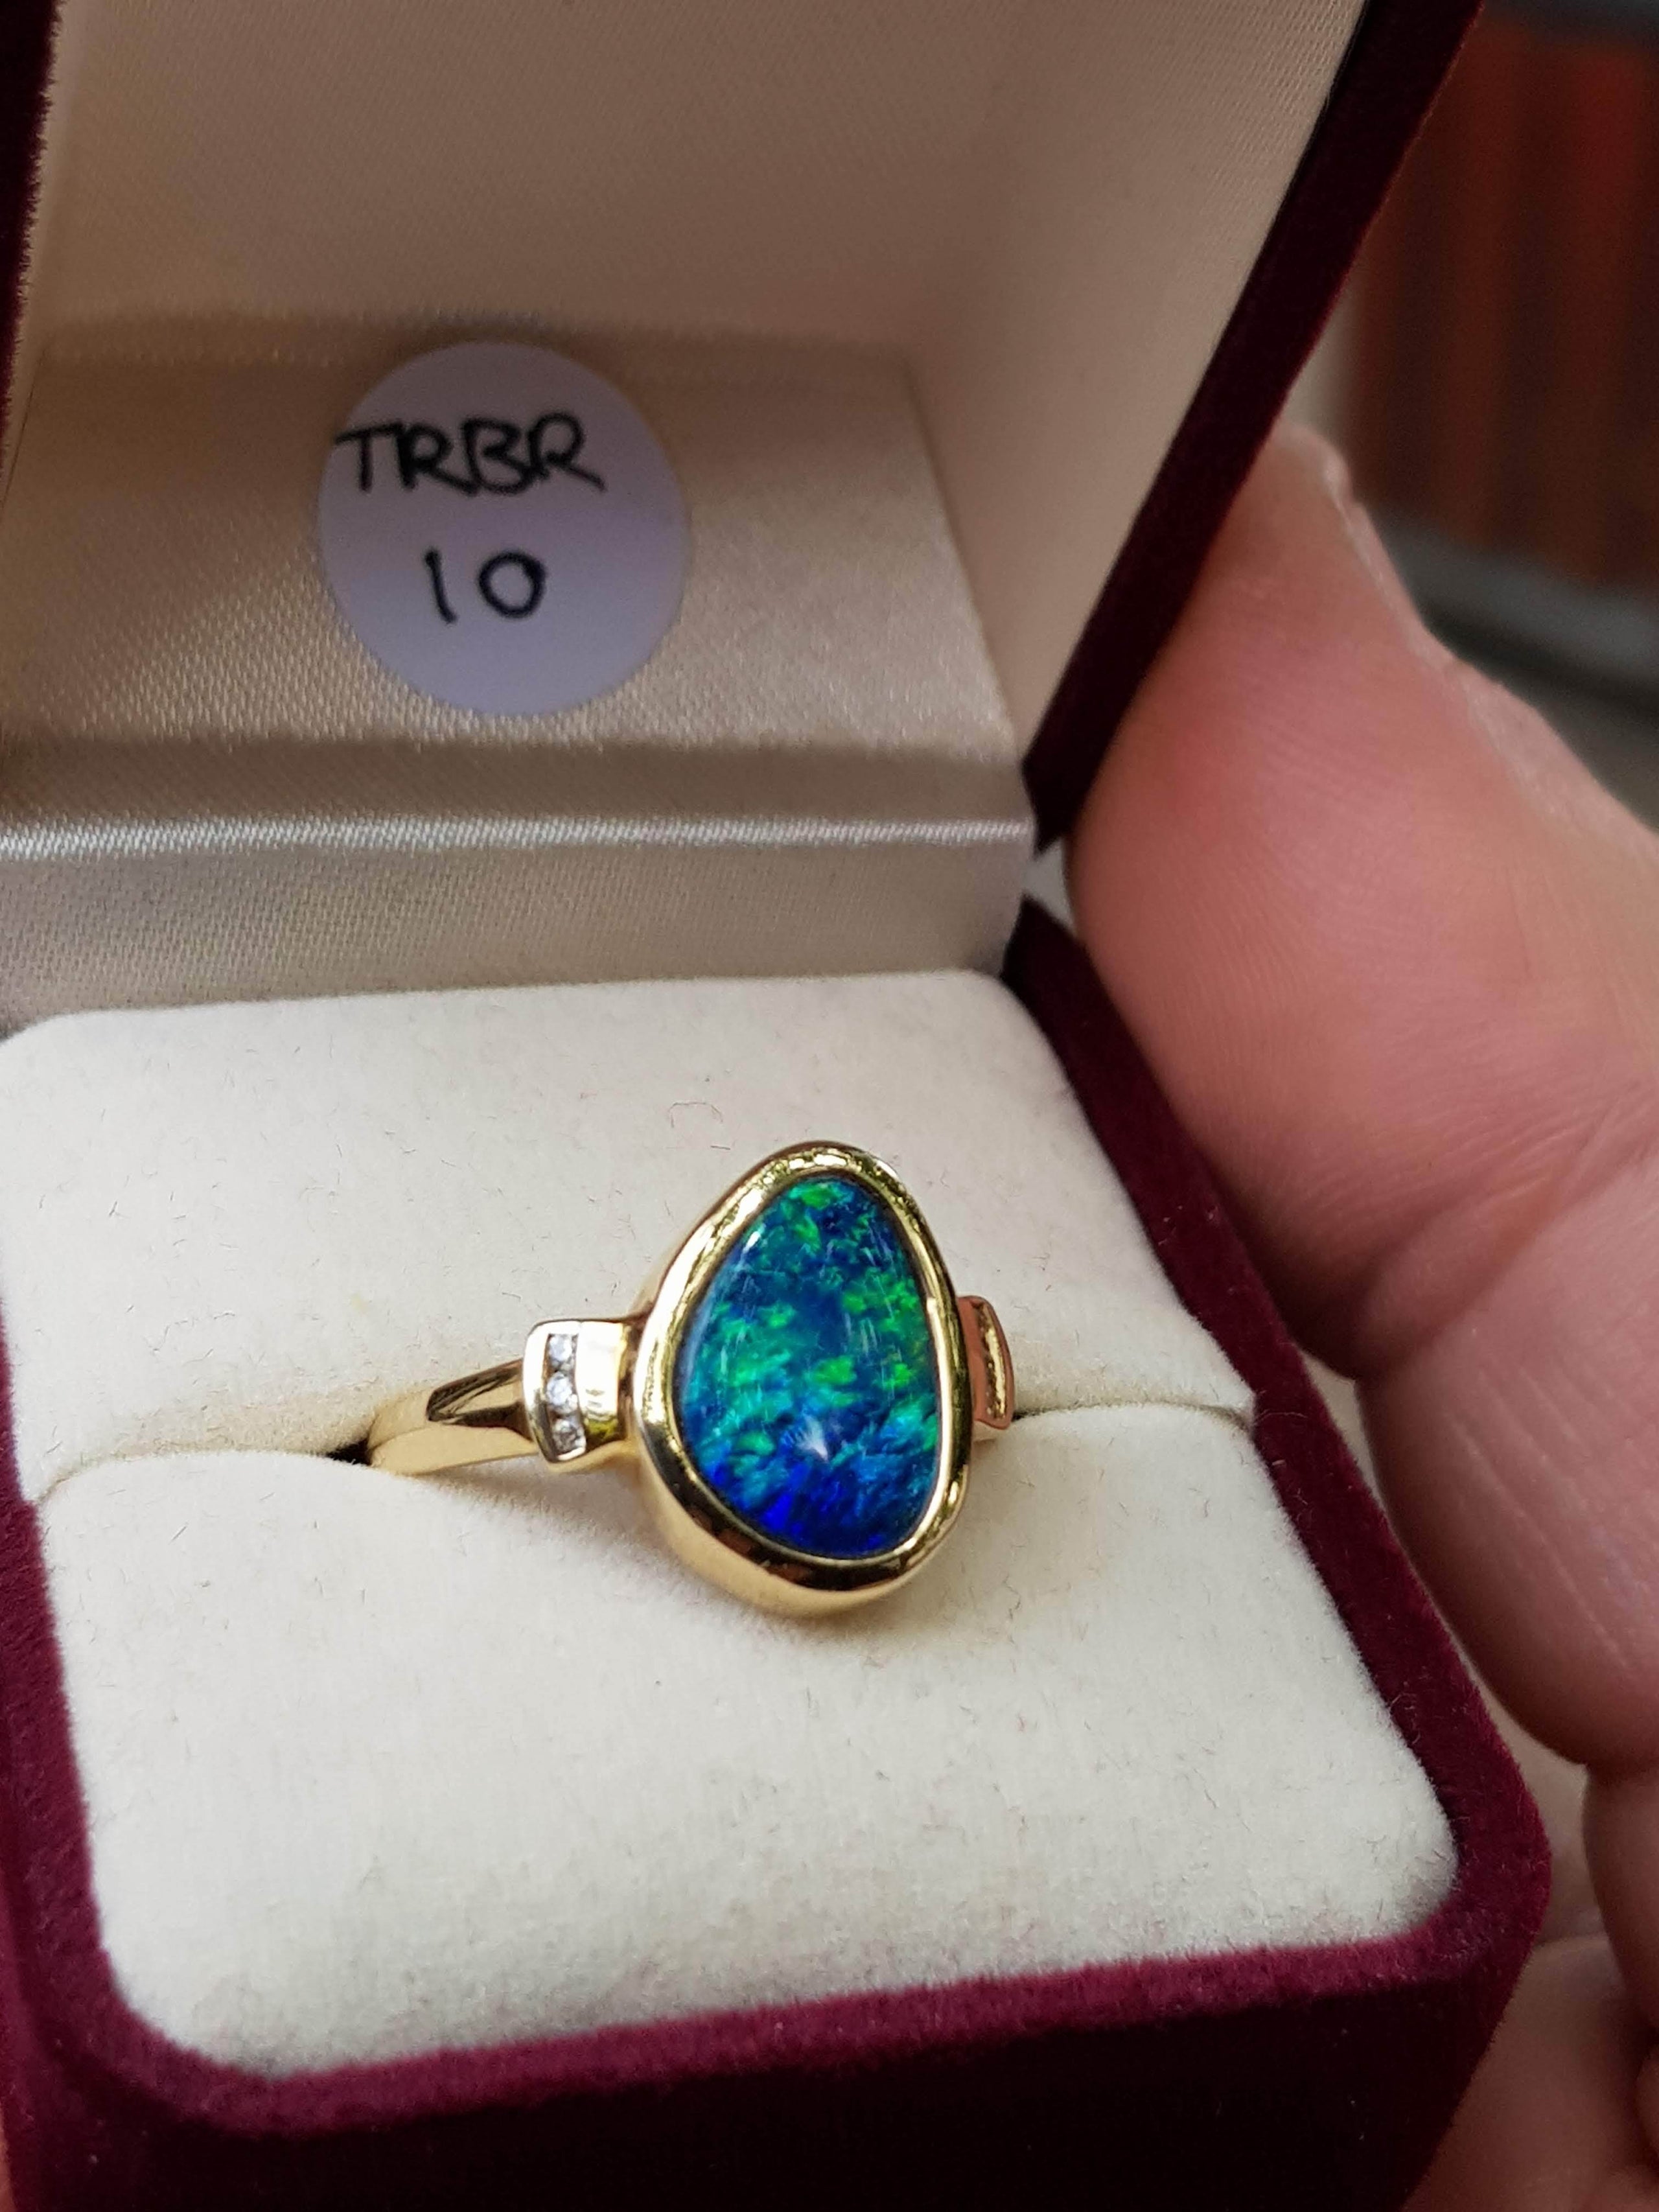 Black Boulder Opal Doublet Ring 14ct Gold with 6 Diamonds